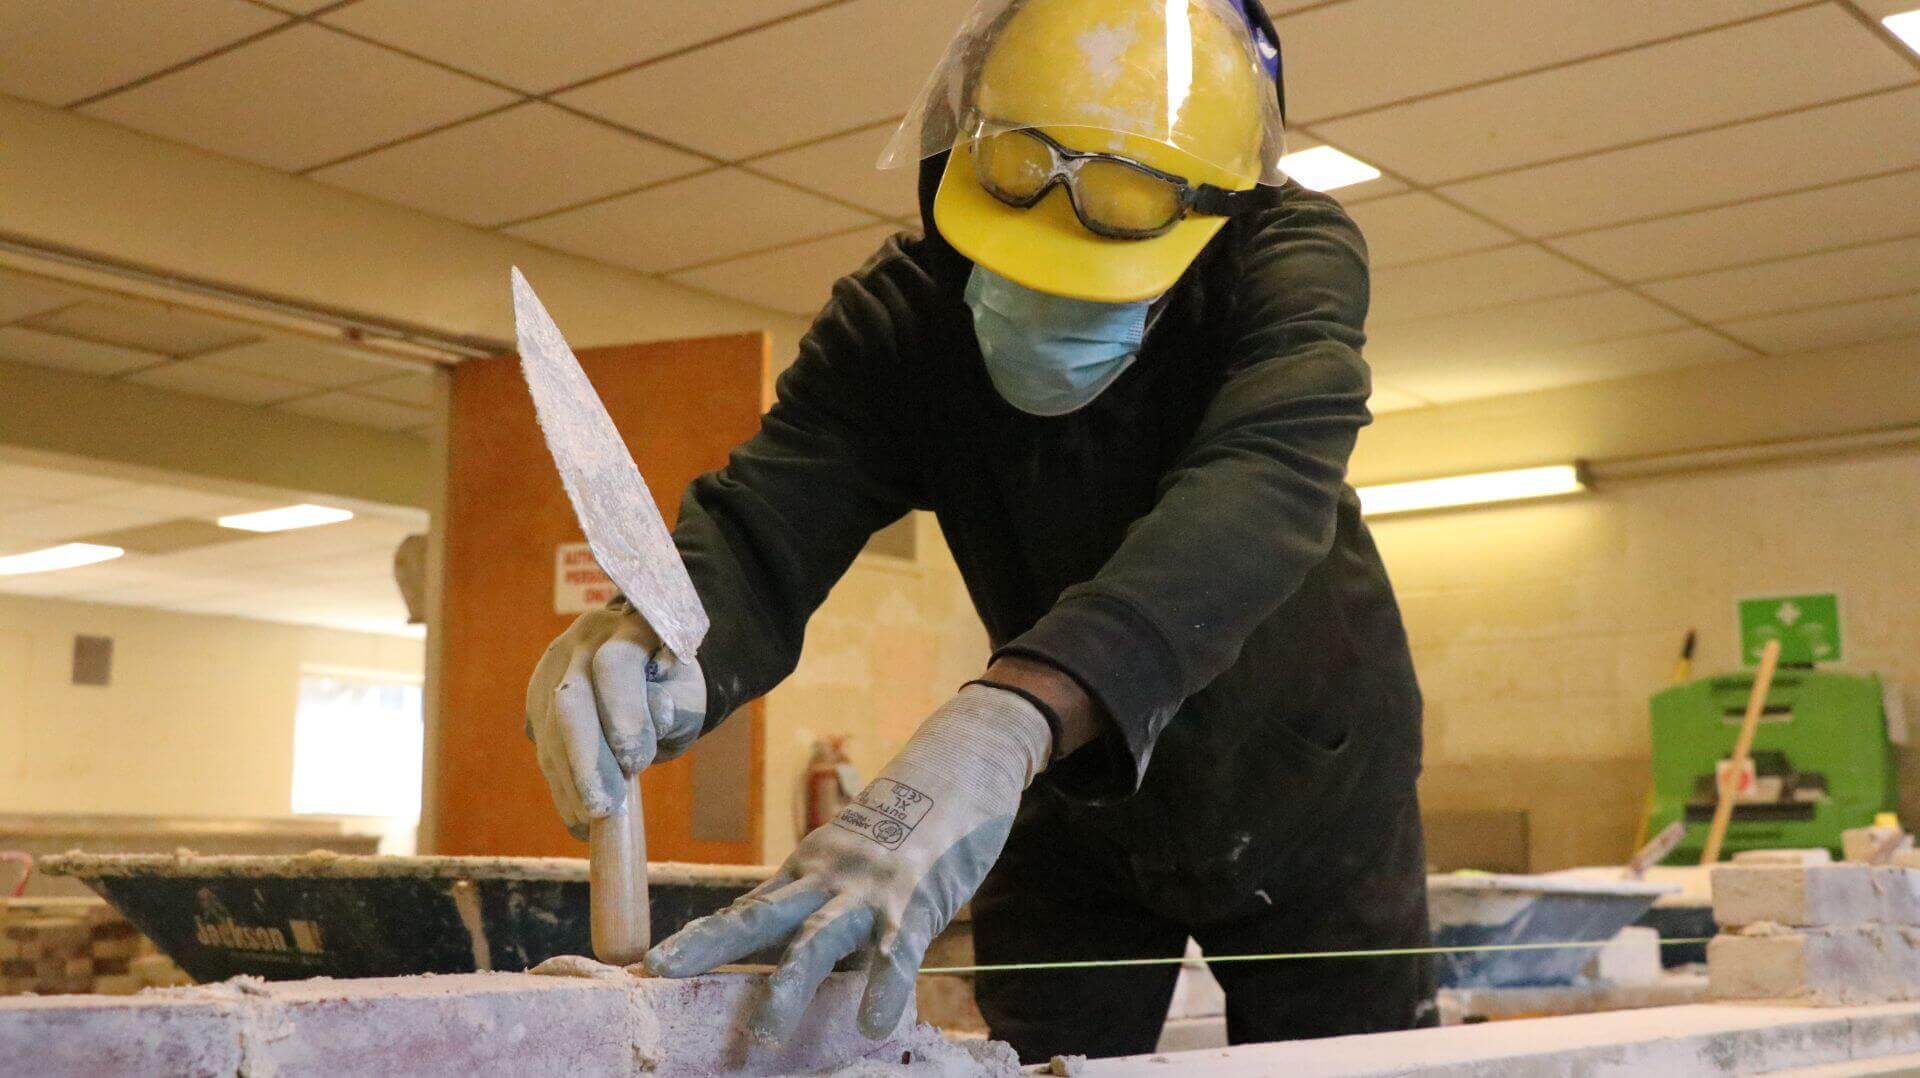 How Can One Kick Start Their Career In Construction Skilled Trades?